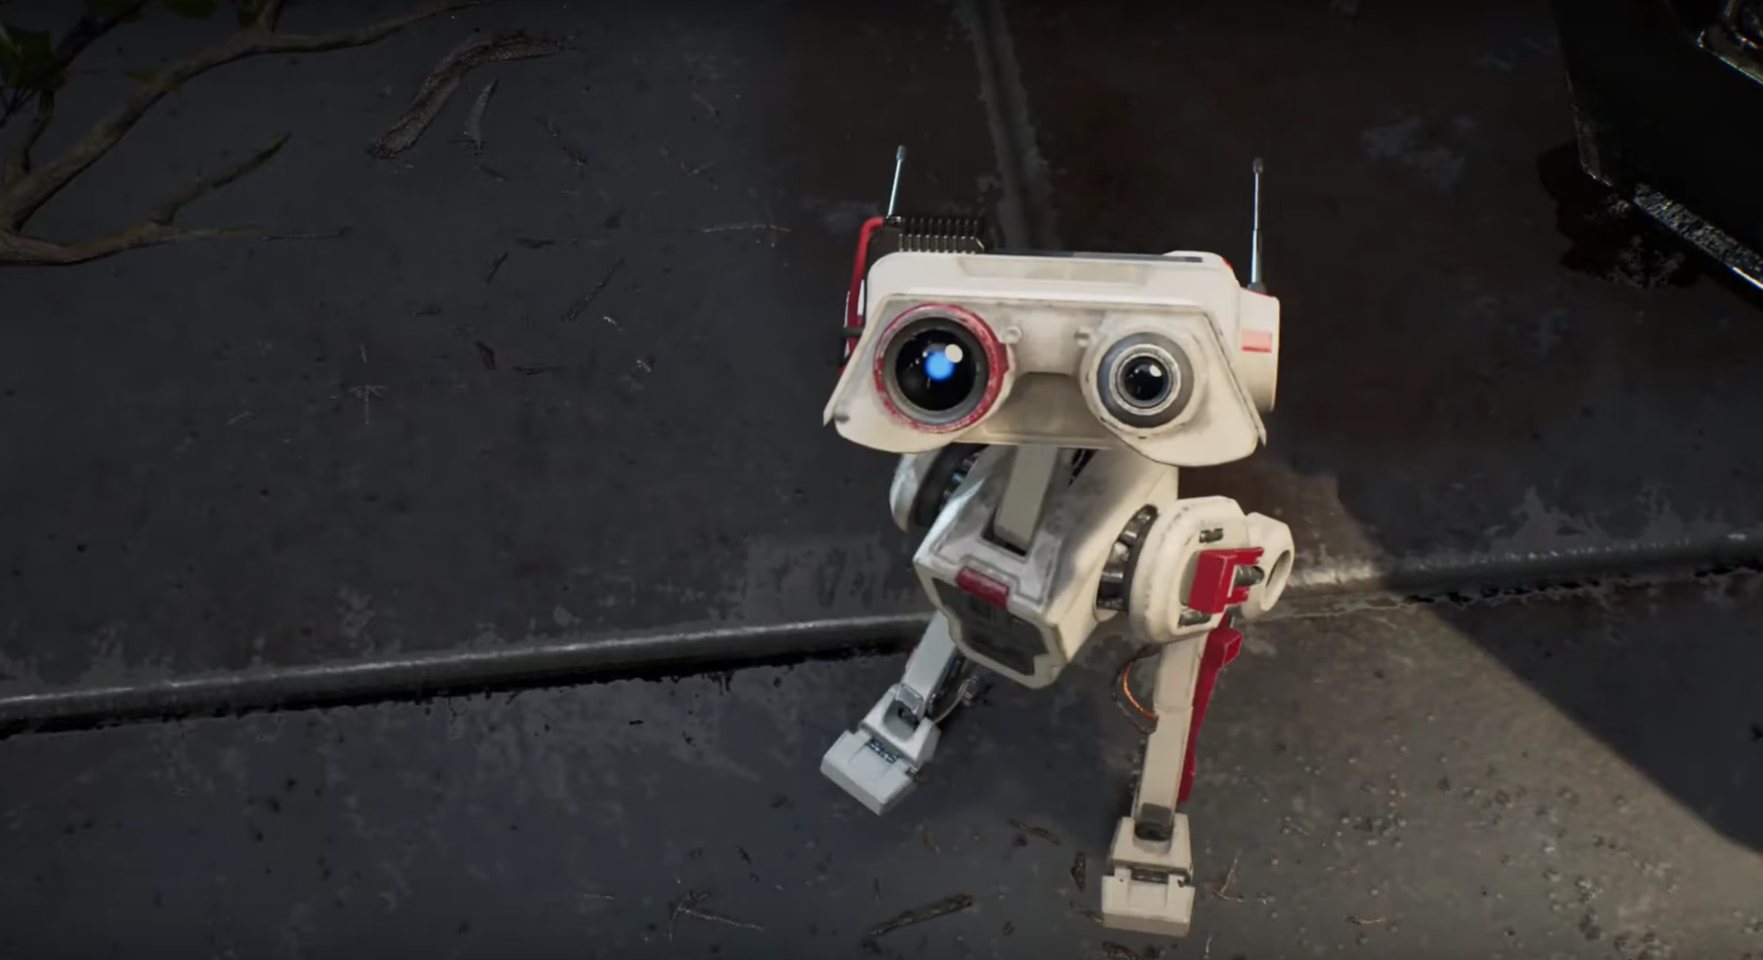 Meet BD- the cutest Star Wars droid to ever grace our galaxy